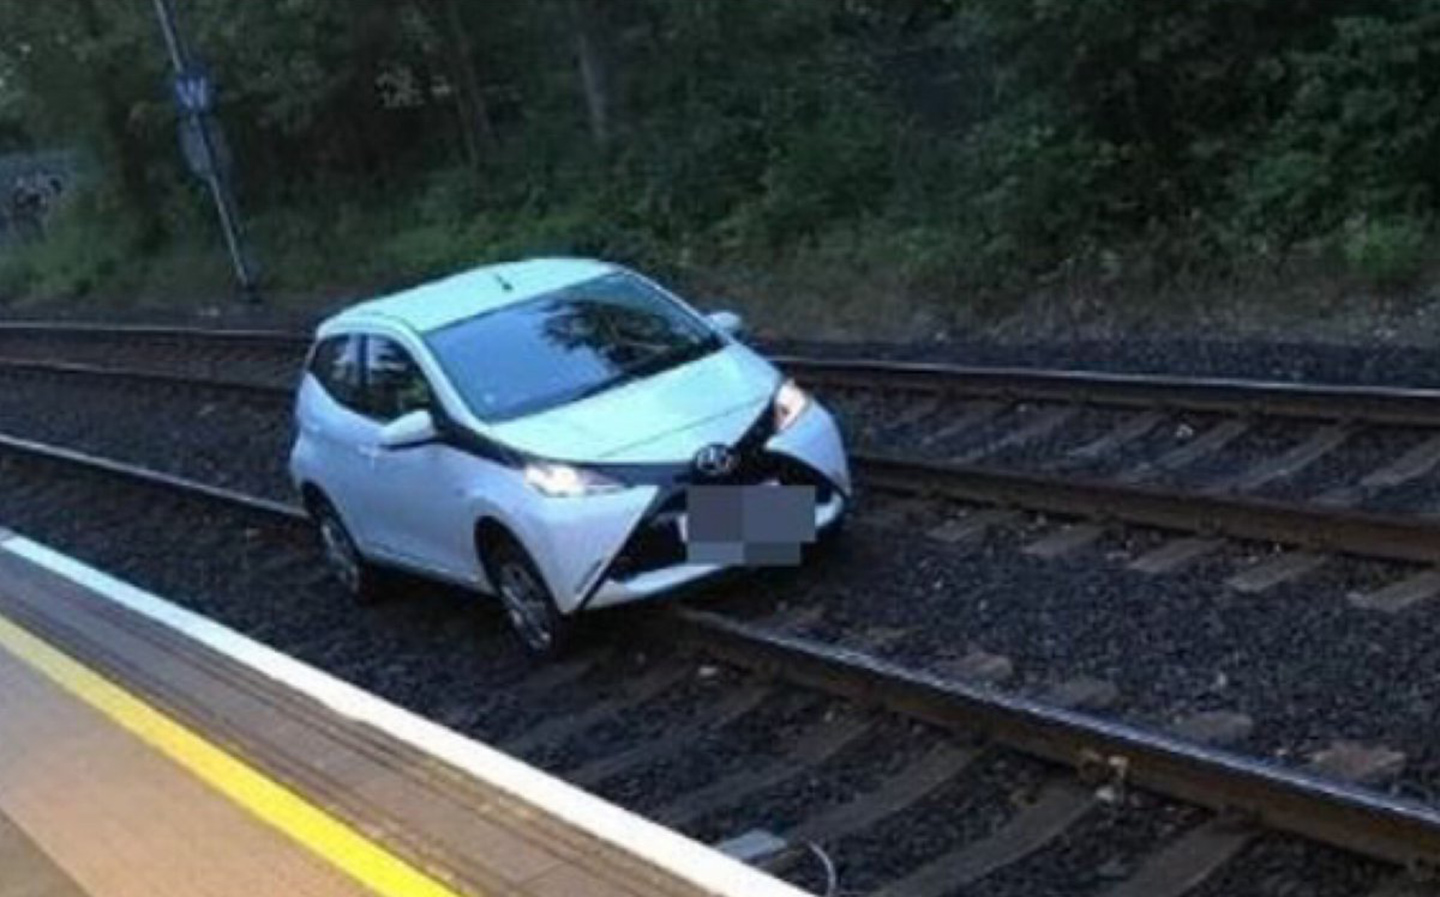 Pensioner makes wrong turn onto railway line in Toyota Aygo